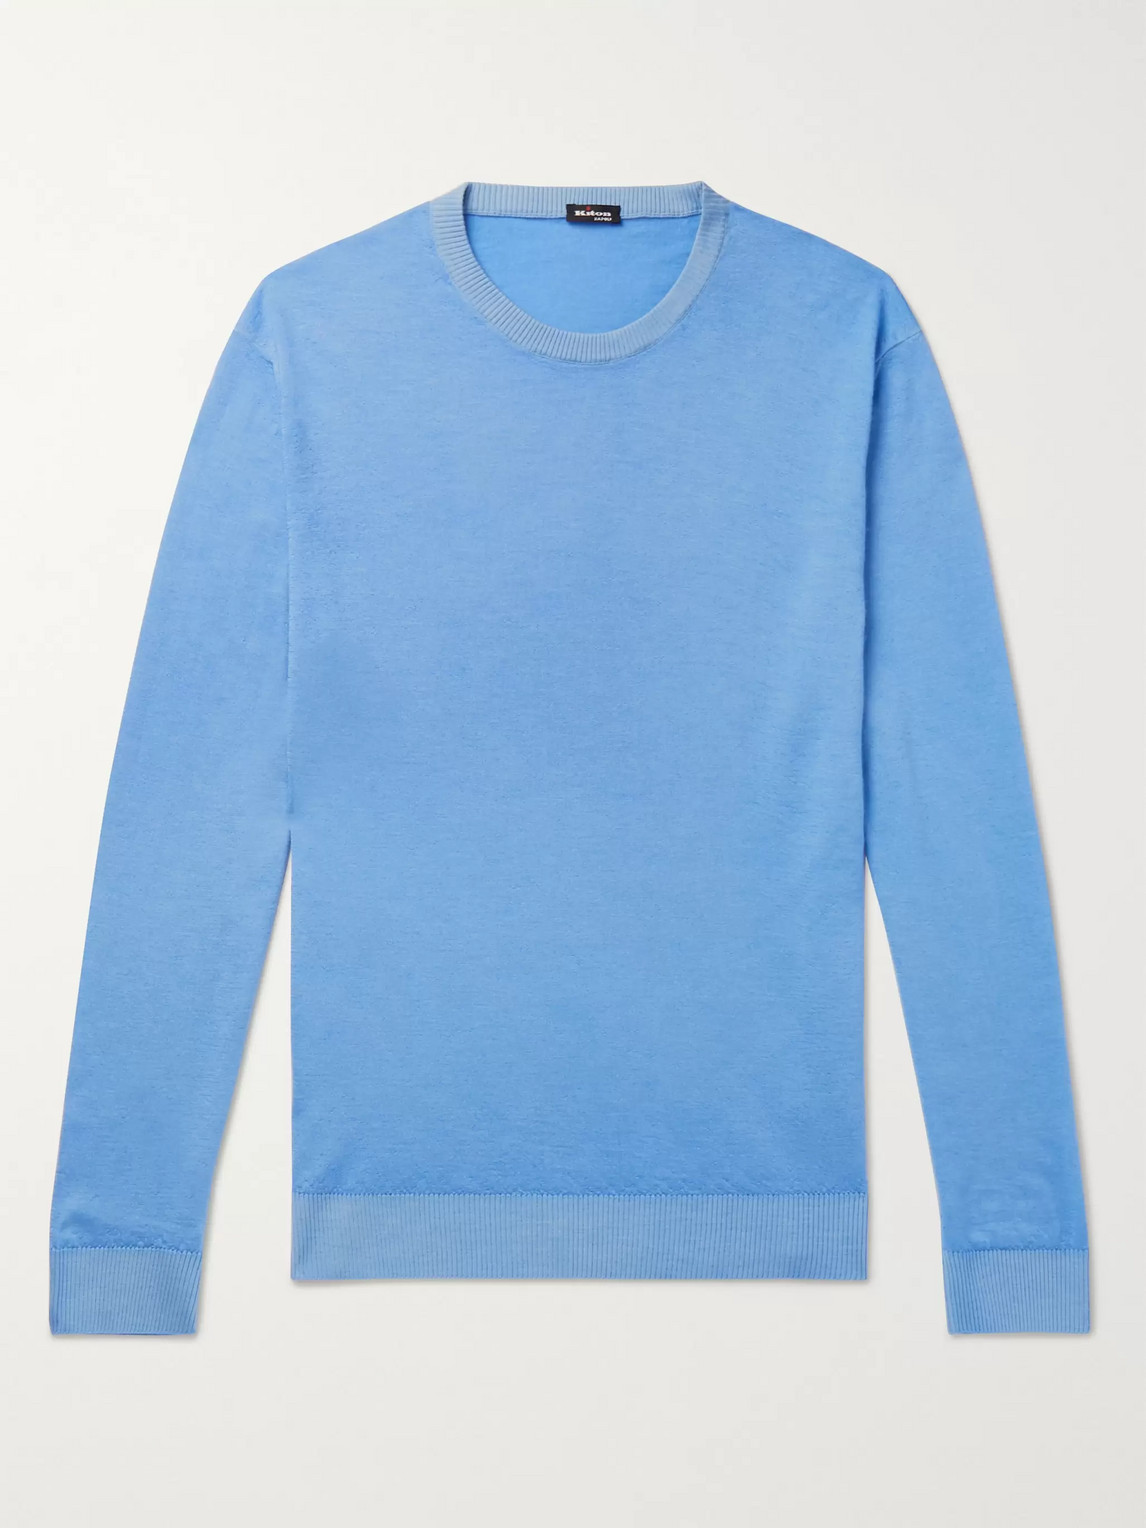 KITON SLIM-FIT CASHMERE AND SILK-BLEND SWEATER